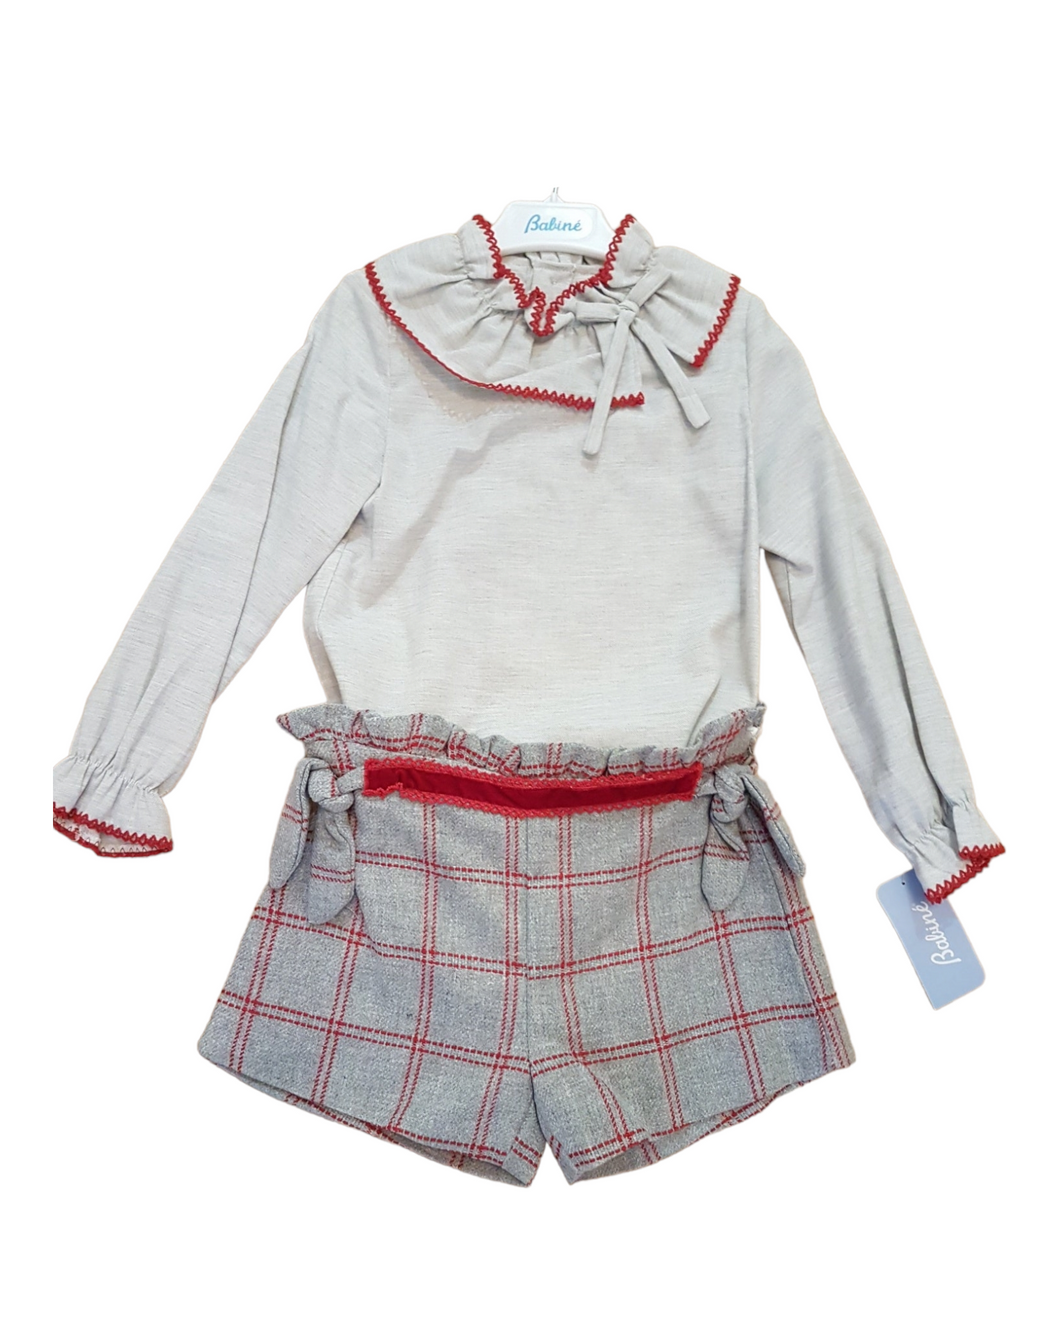 Babiné grey & red set for girls